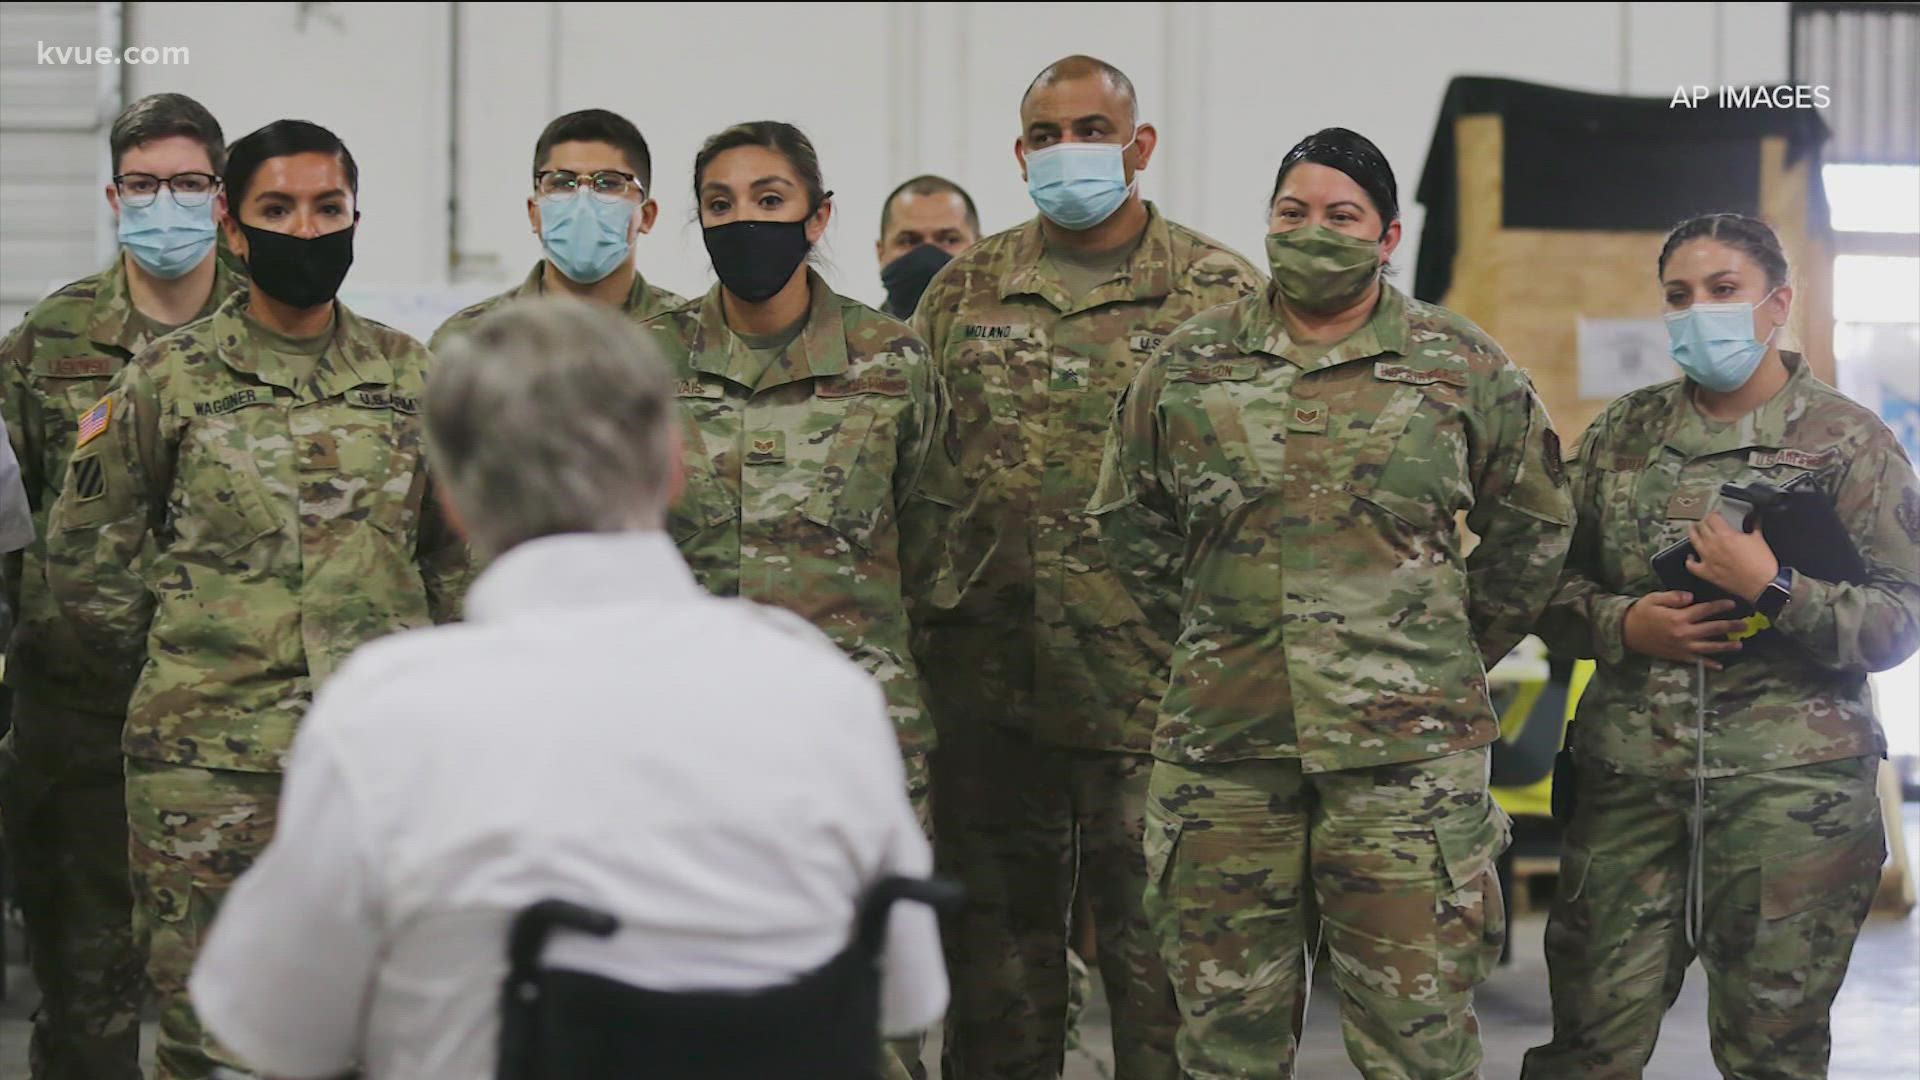 "The State of Texas will not enforce this latest COVID-19 vaccine mandate against its guardsmen," Abbott said.